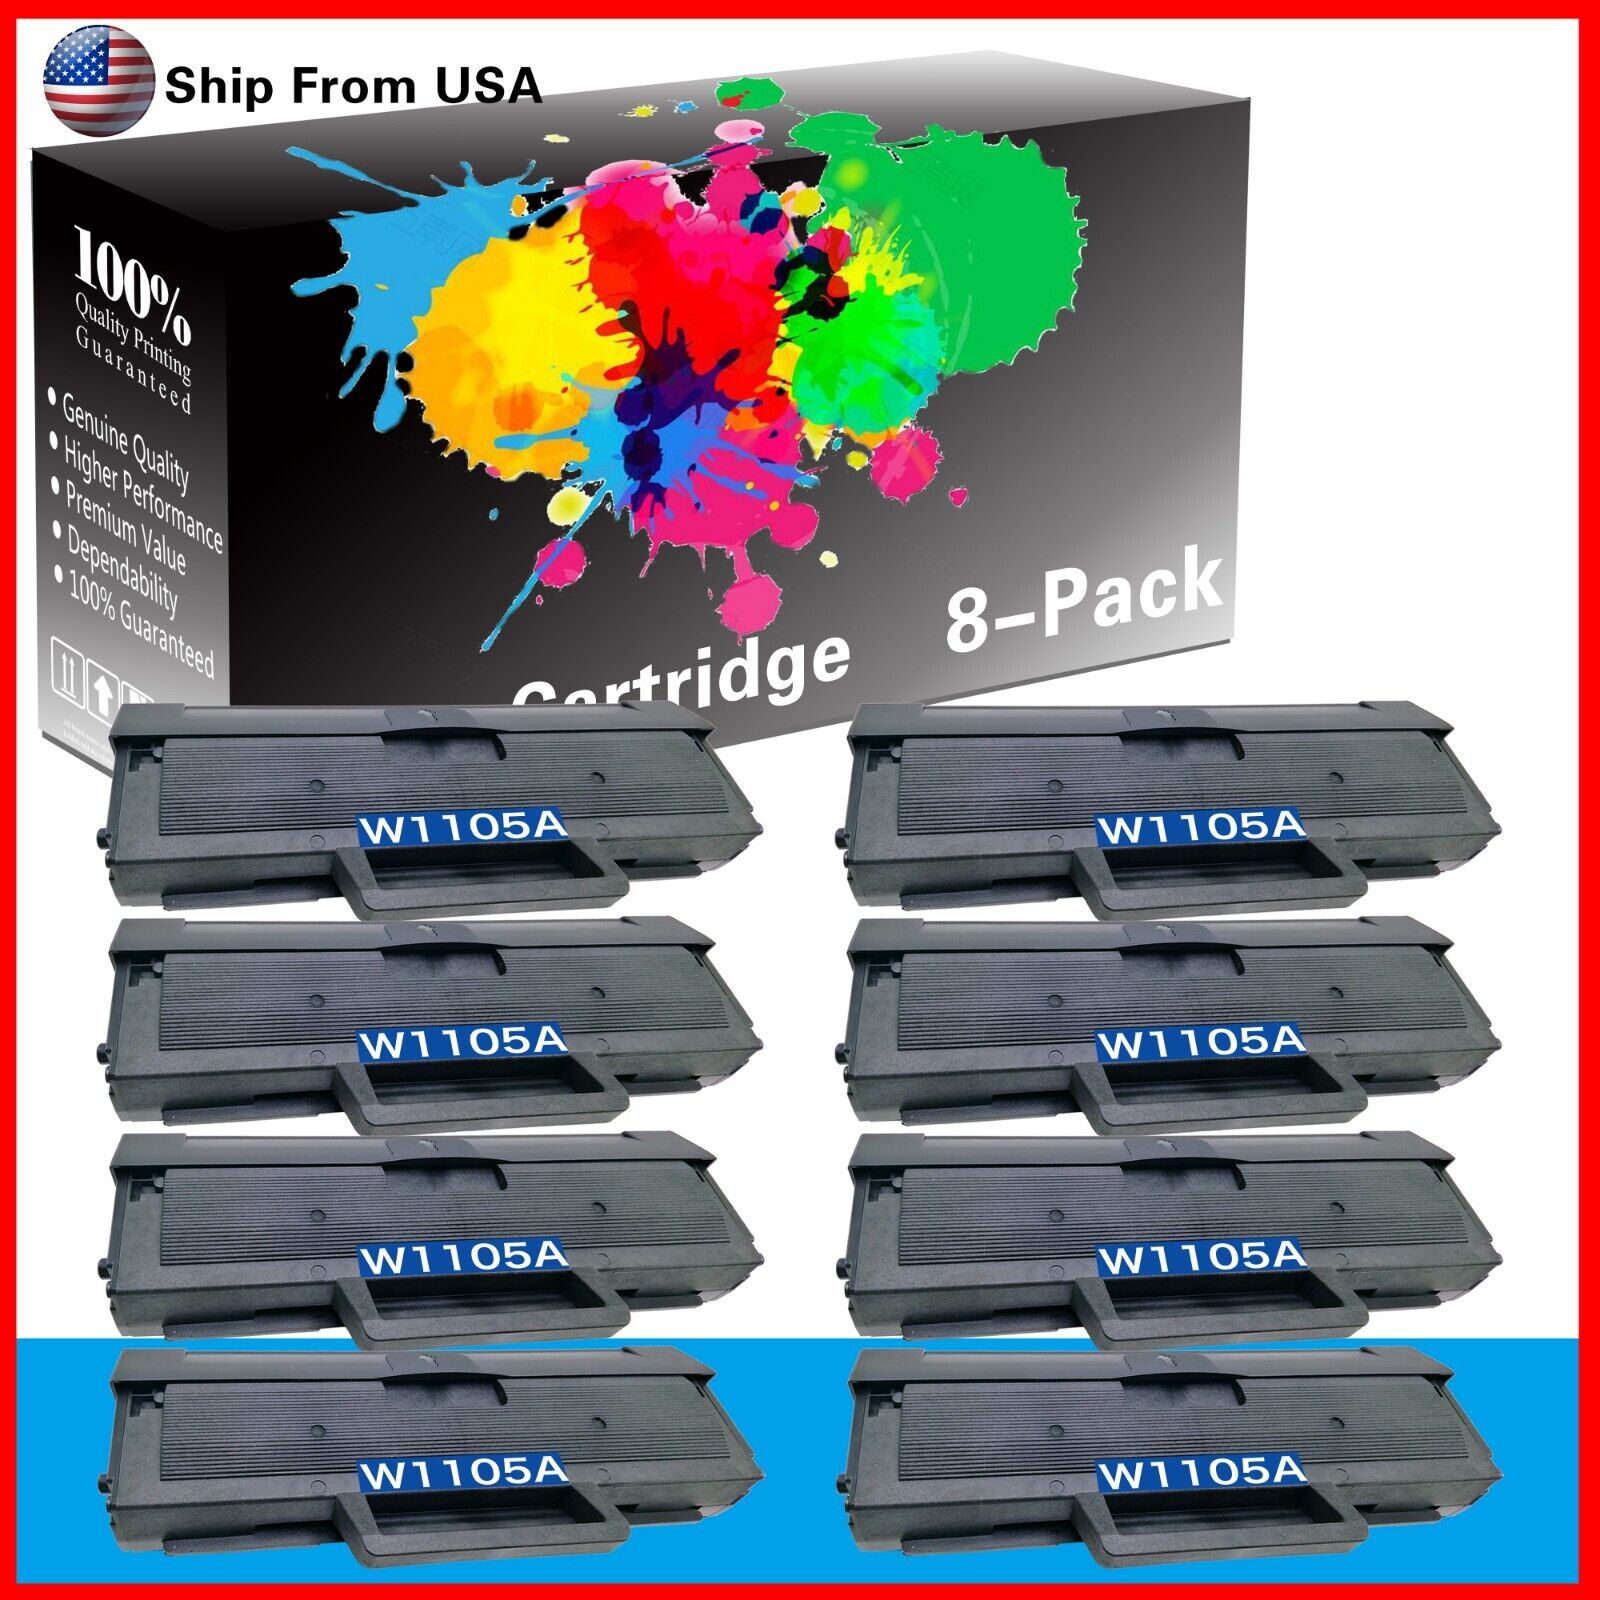 8-Pack 1105A W1105A Toner Cartridge Fit For Laser MFP 135w Printer